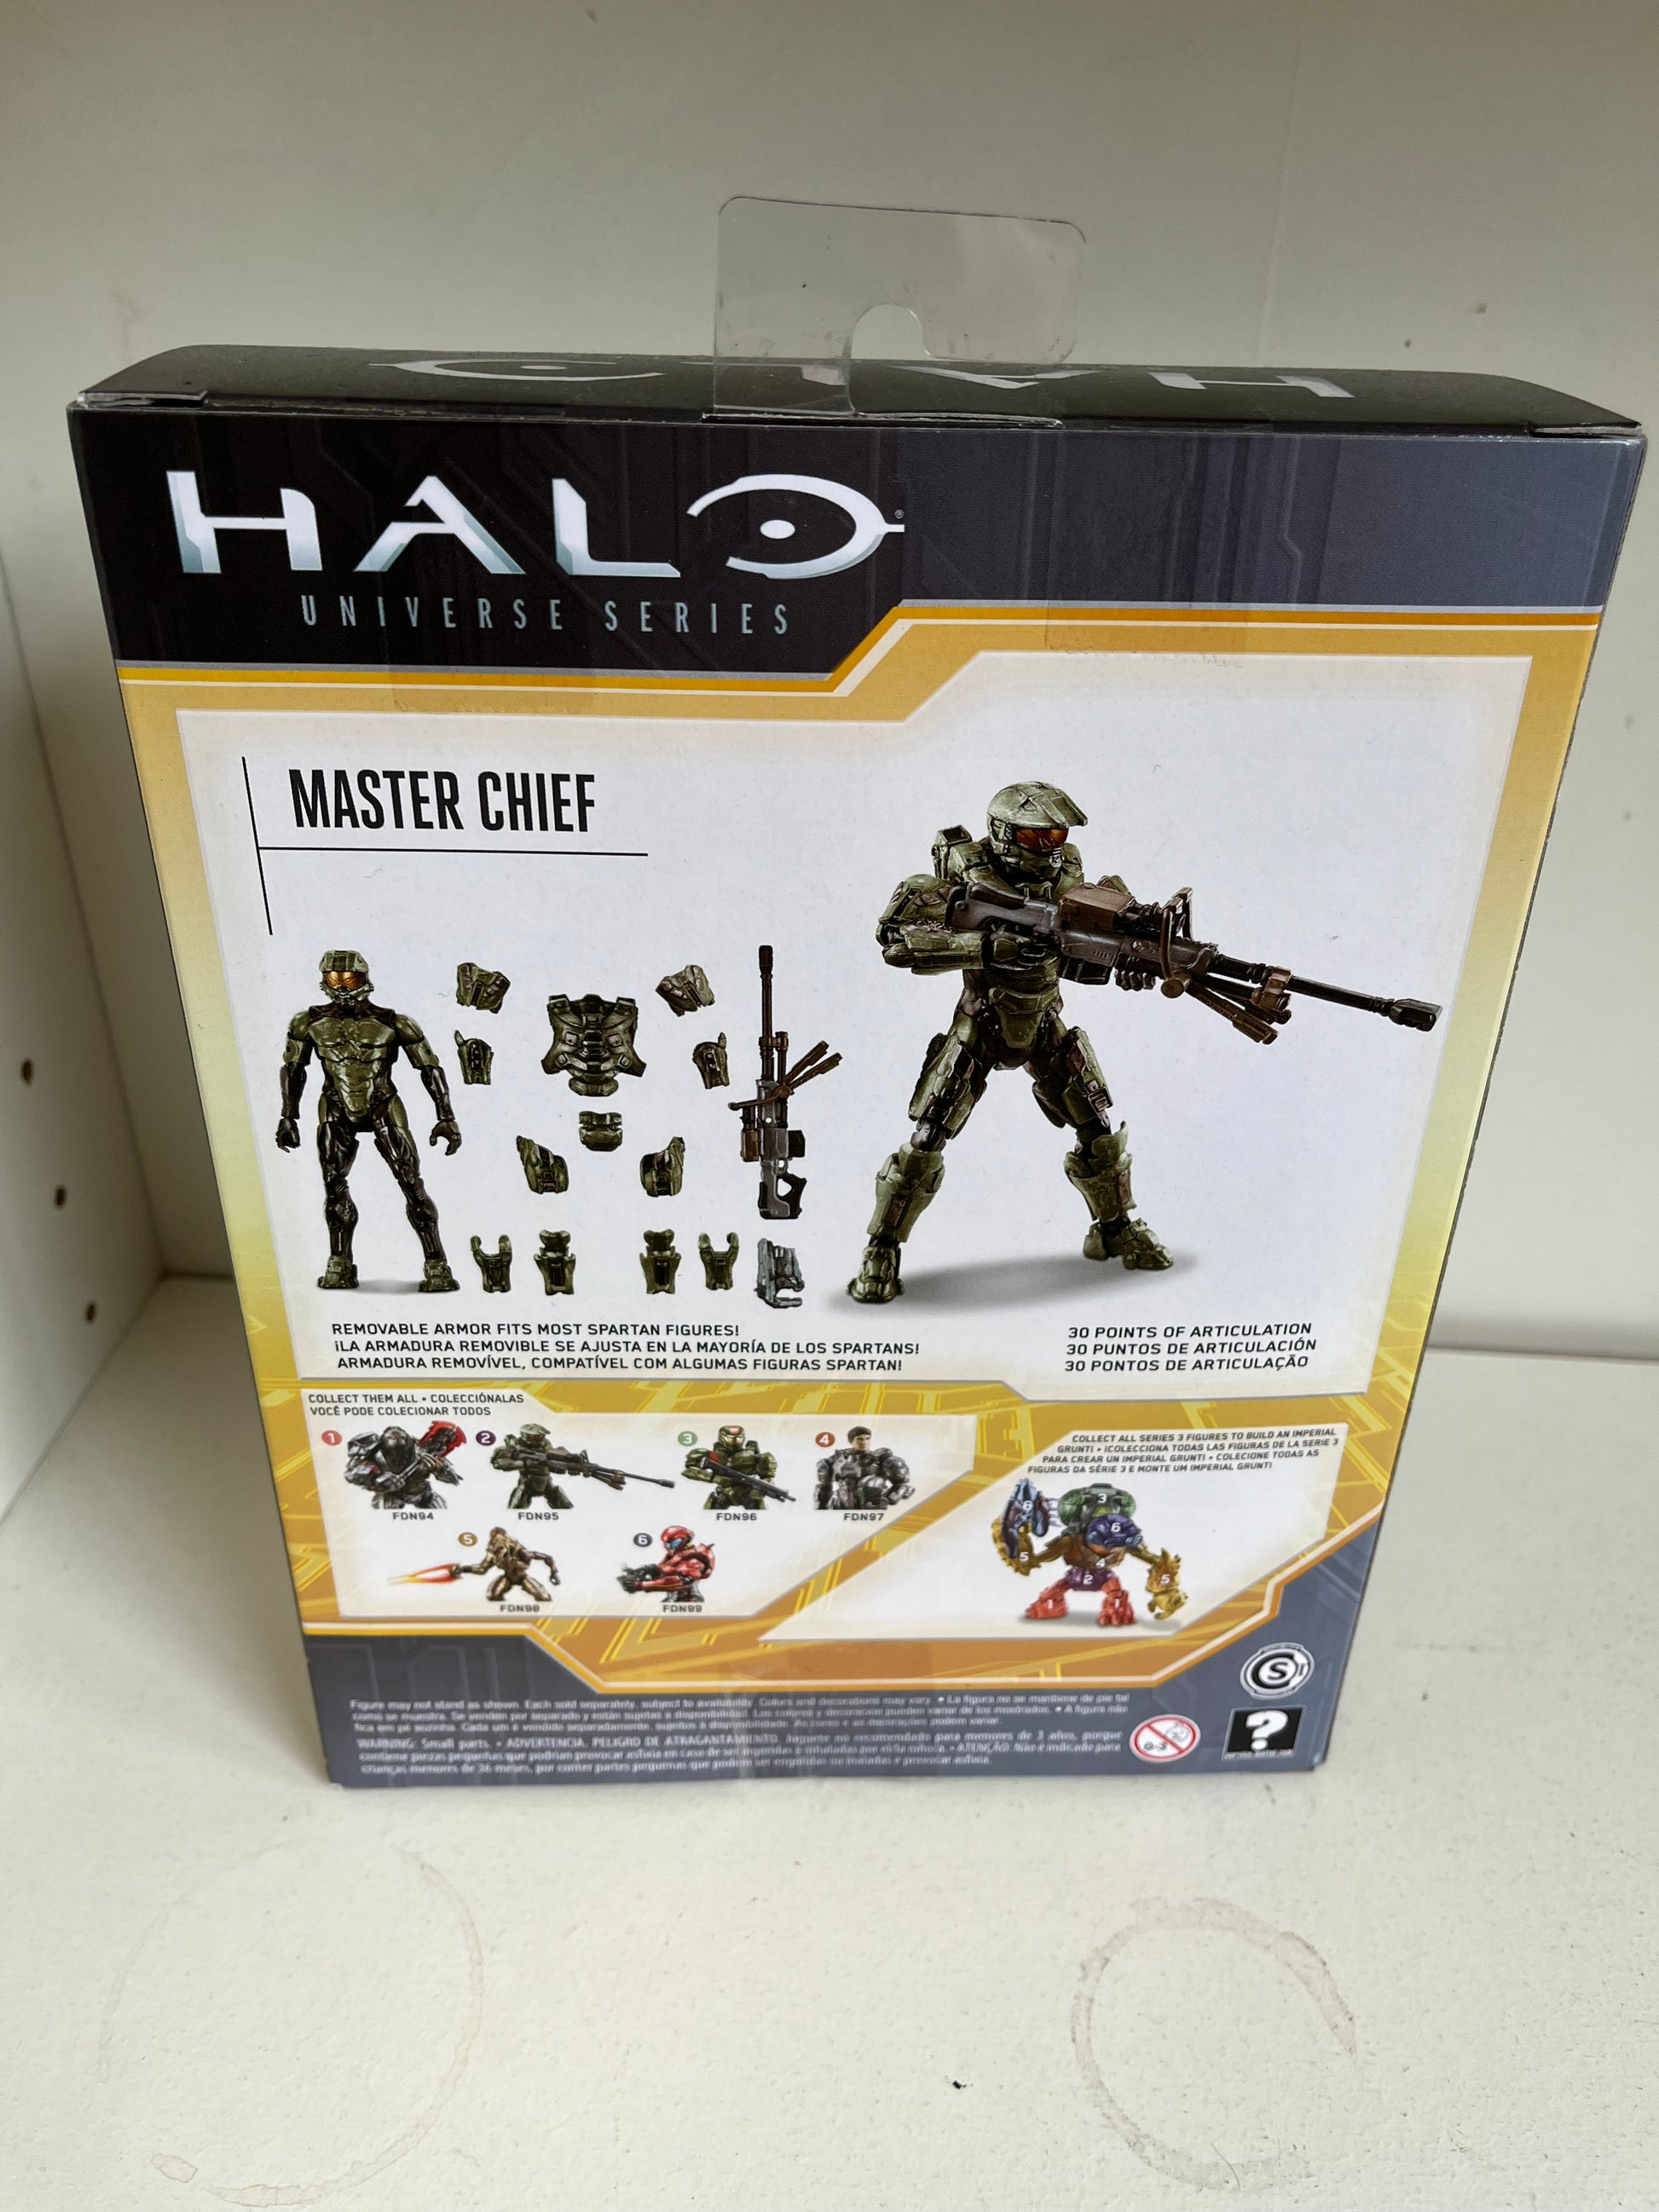 Halo Universe Series: Master Chief – Mike's Vintage Toys